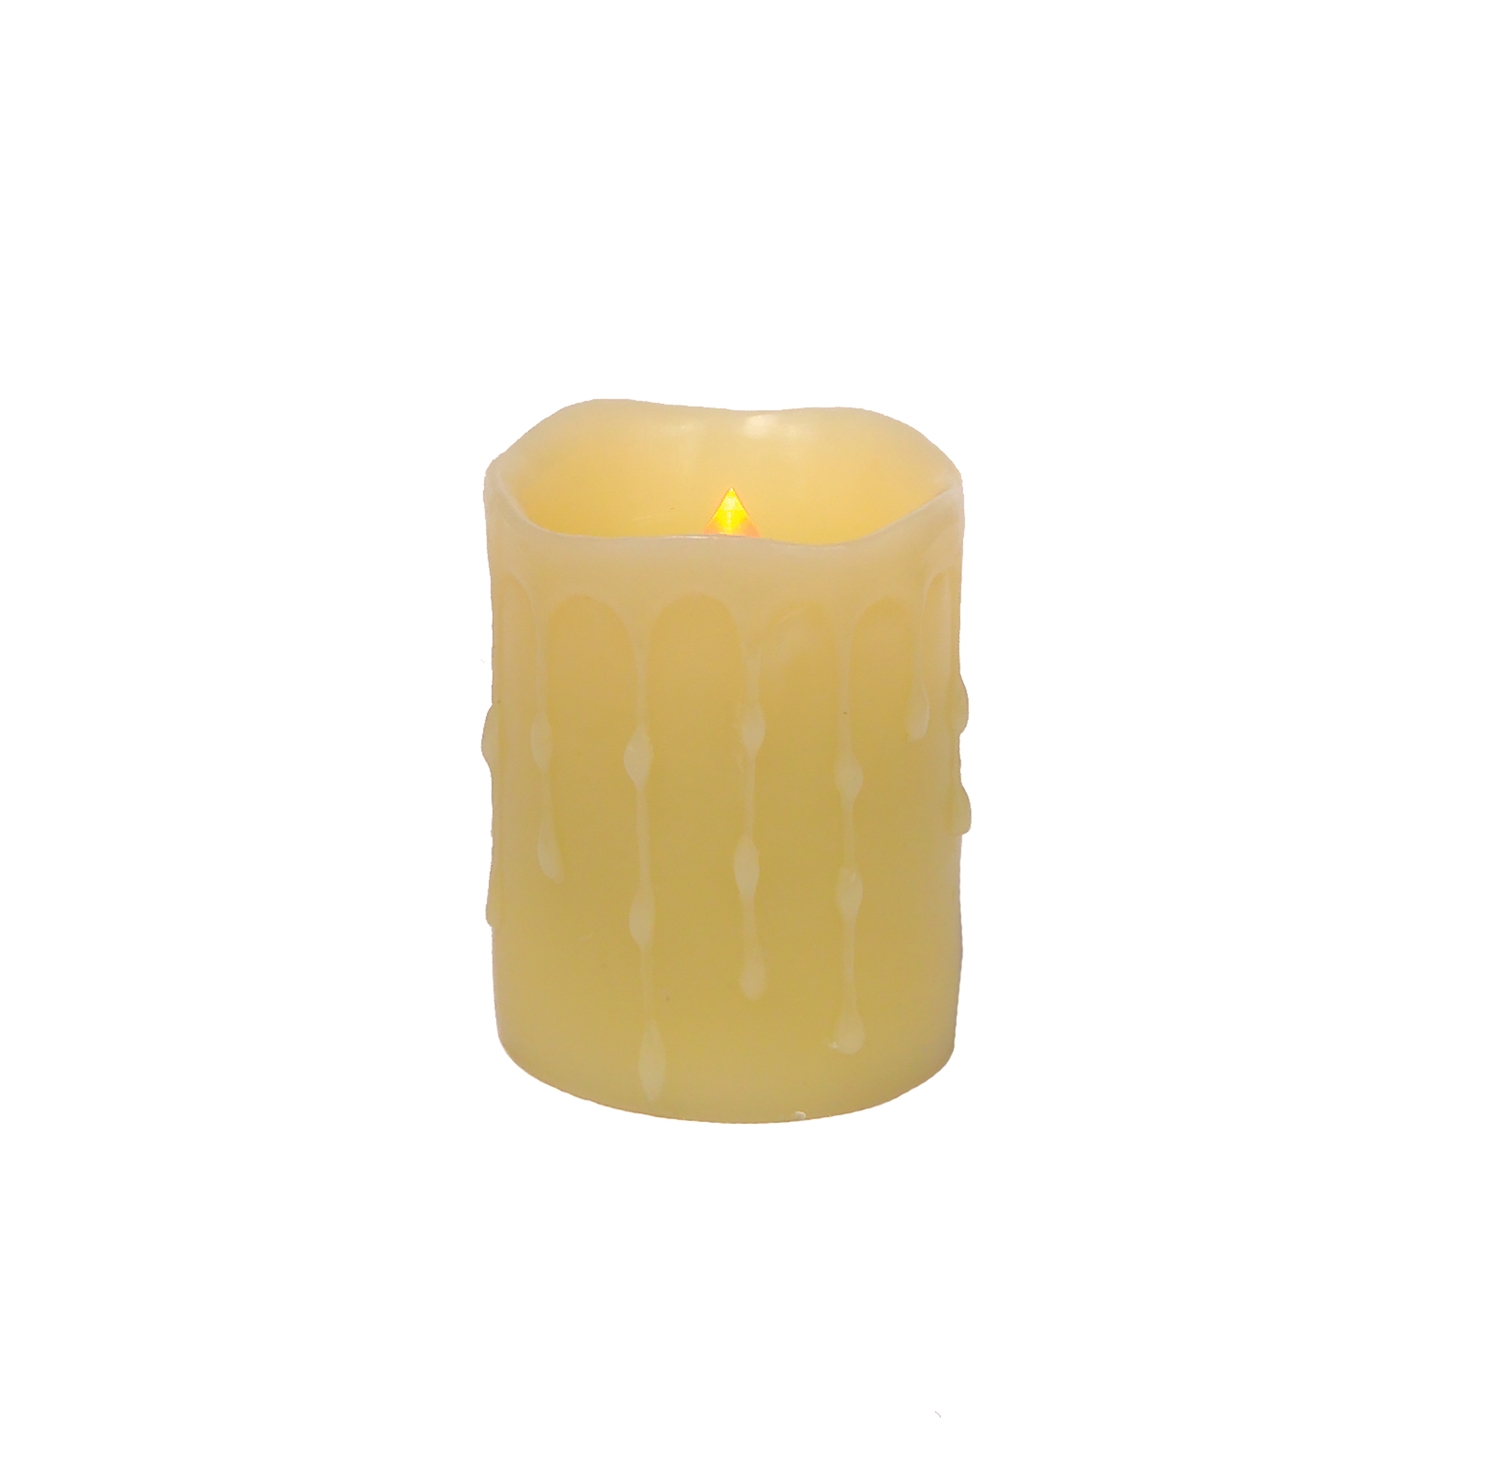 LED Wax Dripping Pillar Candle (Set of 4) 3"Dx4"H Wax/Plastic - 2 C Batteries Not Incld.